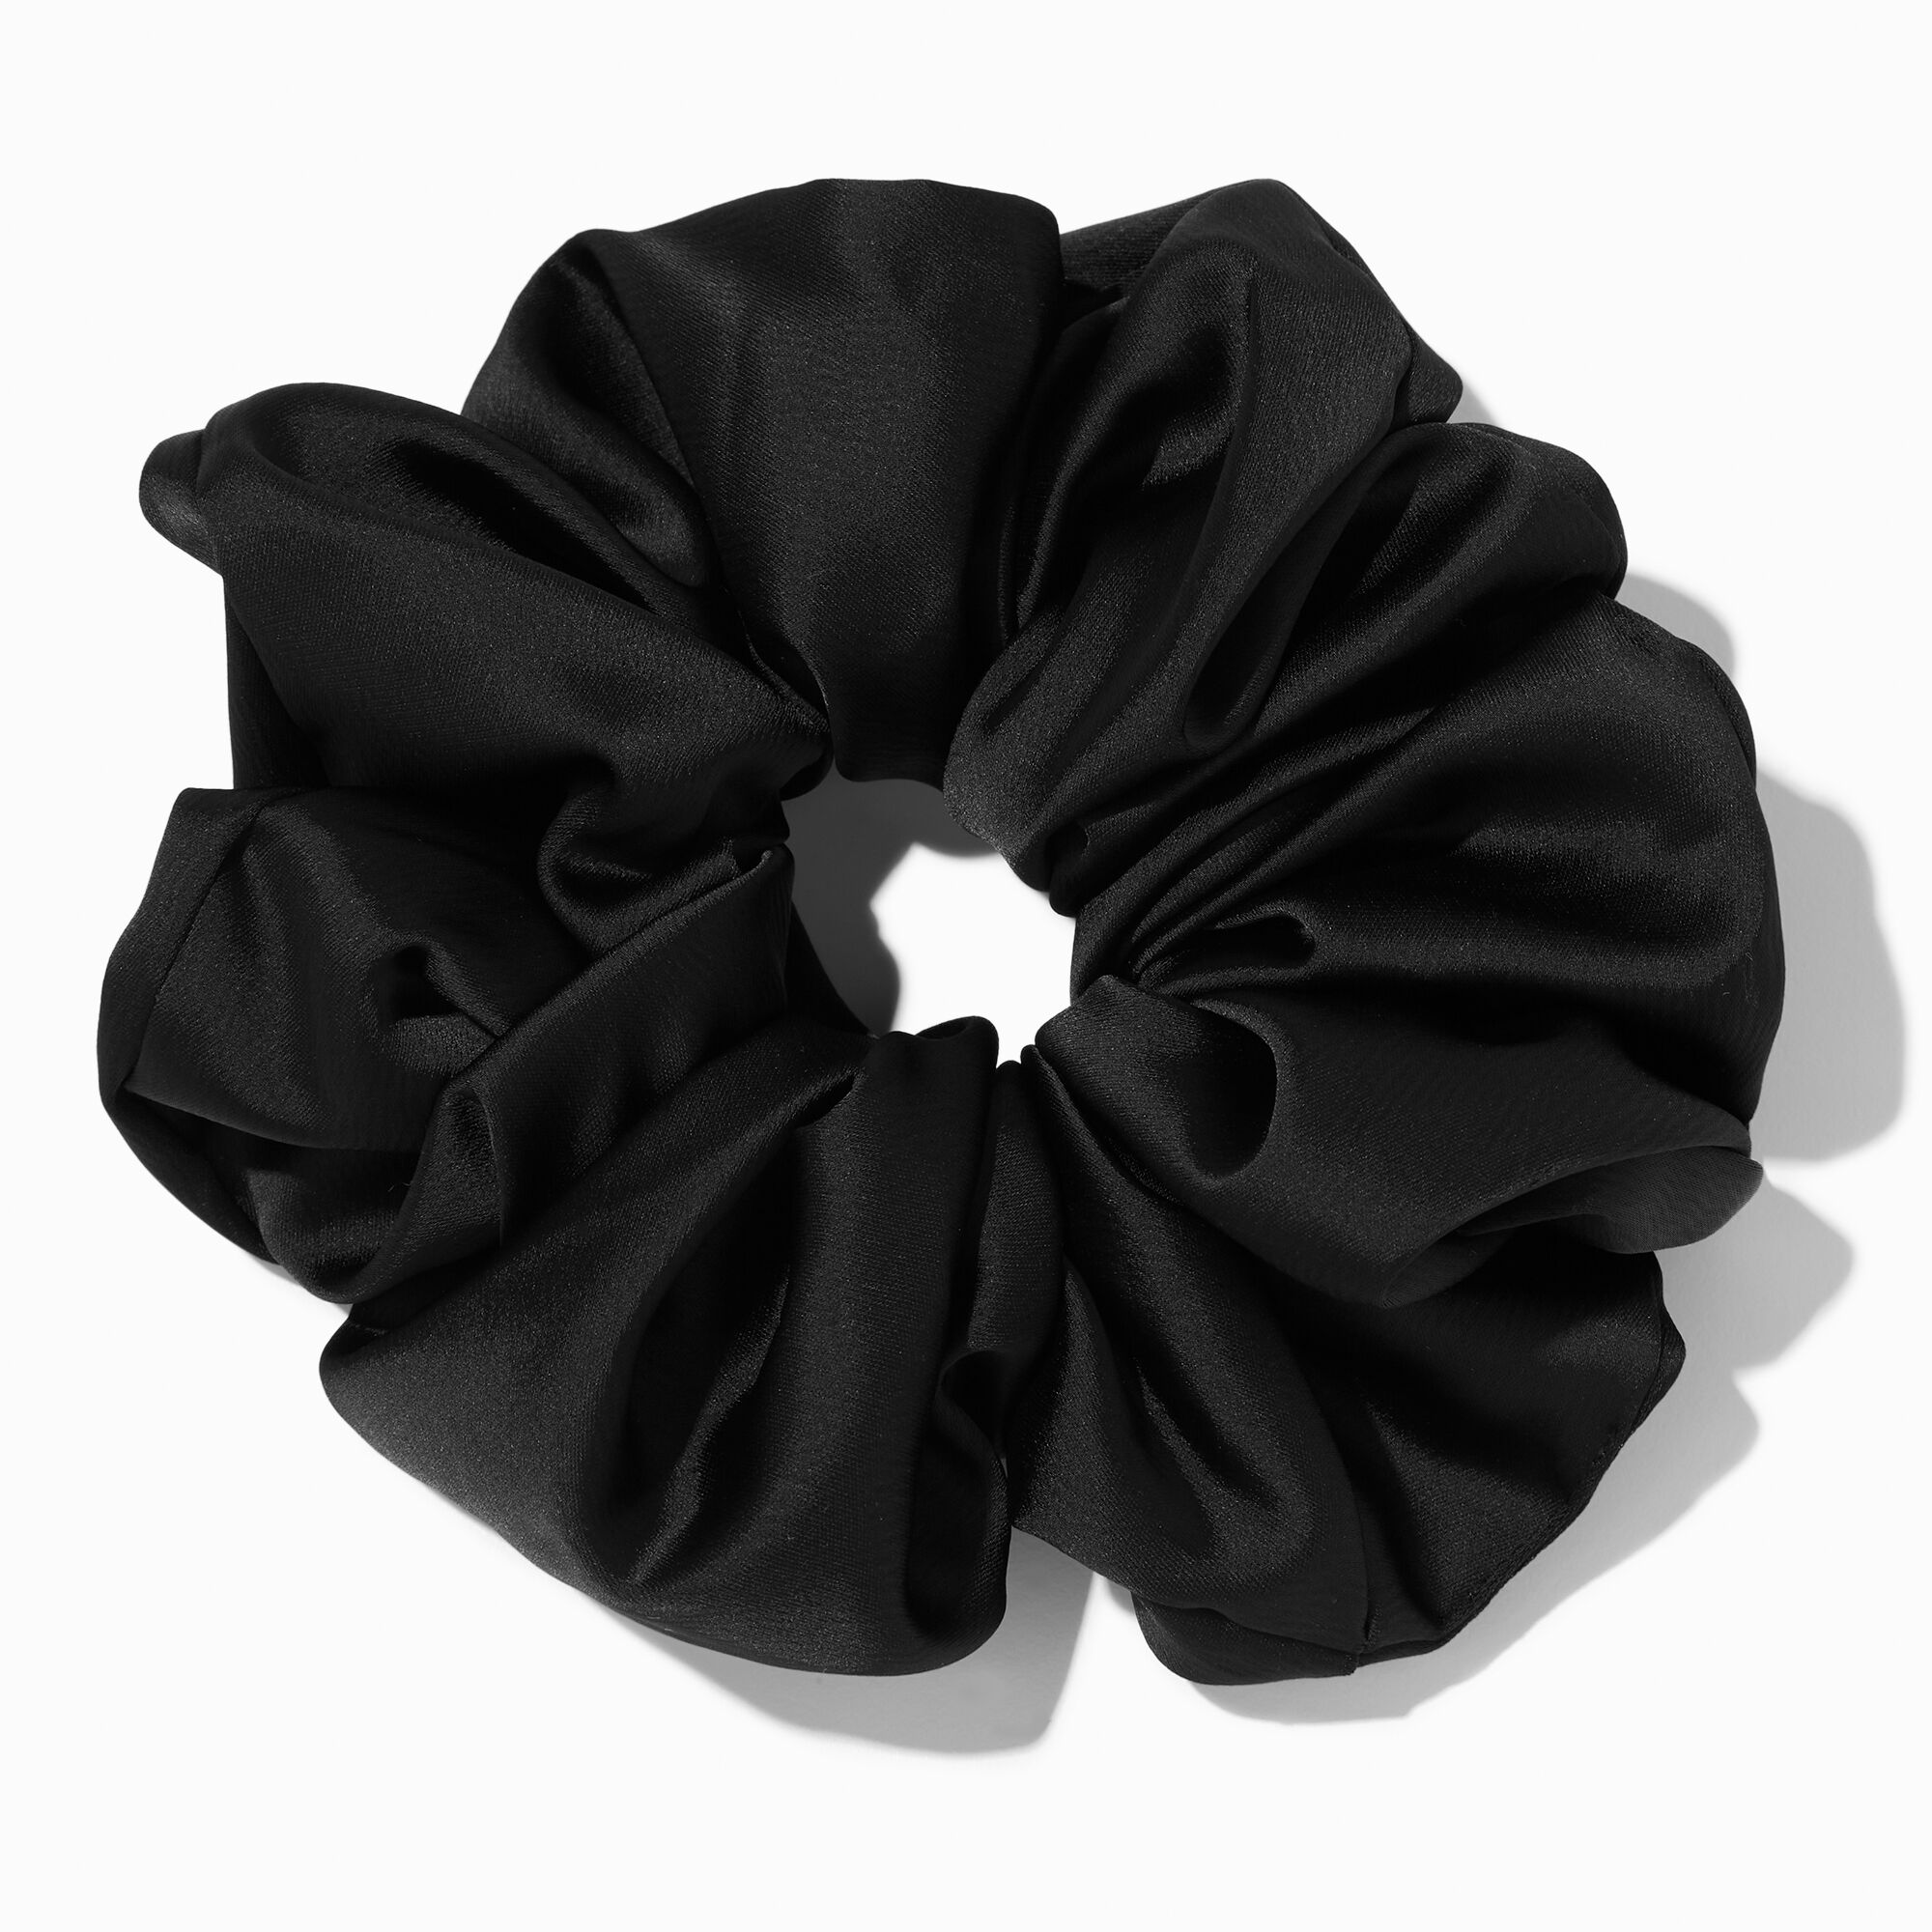 View Claires Giant Silky Hair Scrunchie Black information